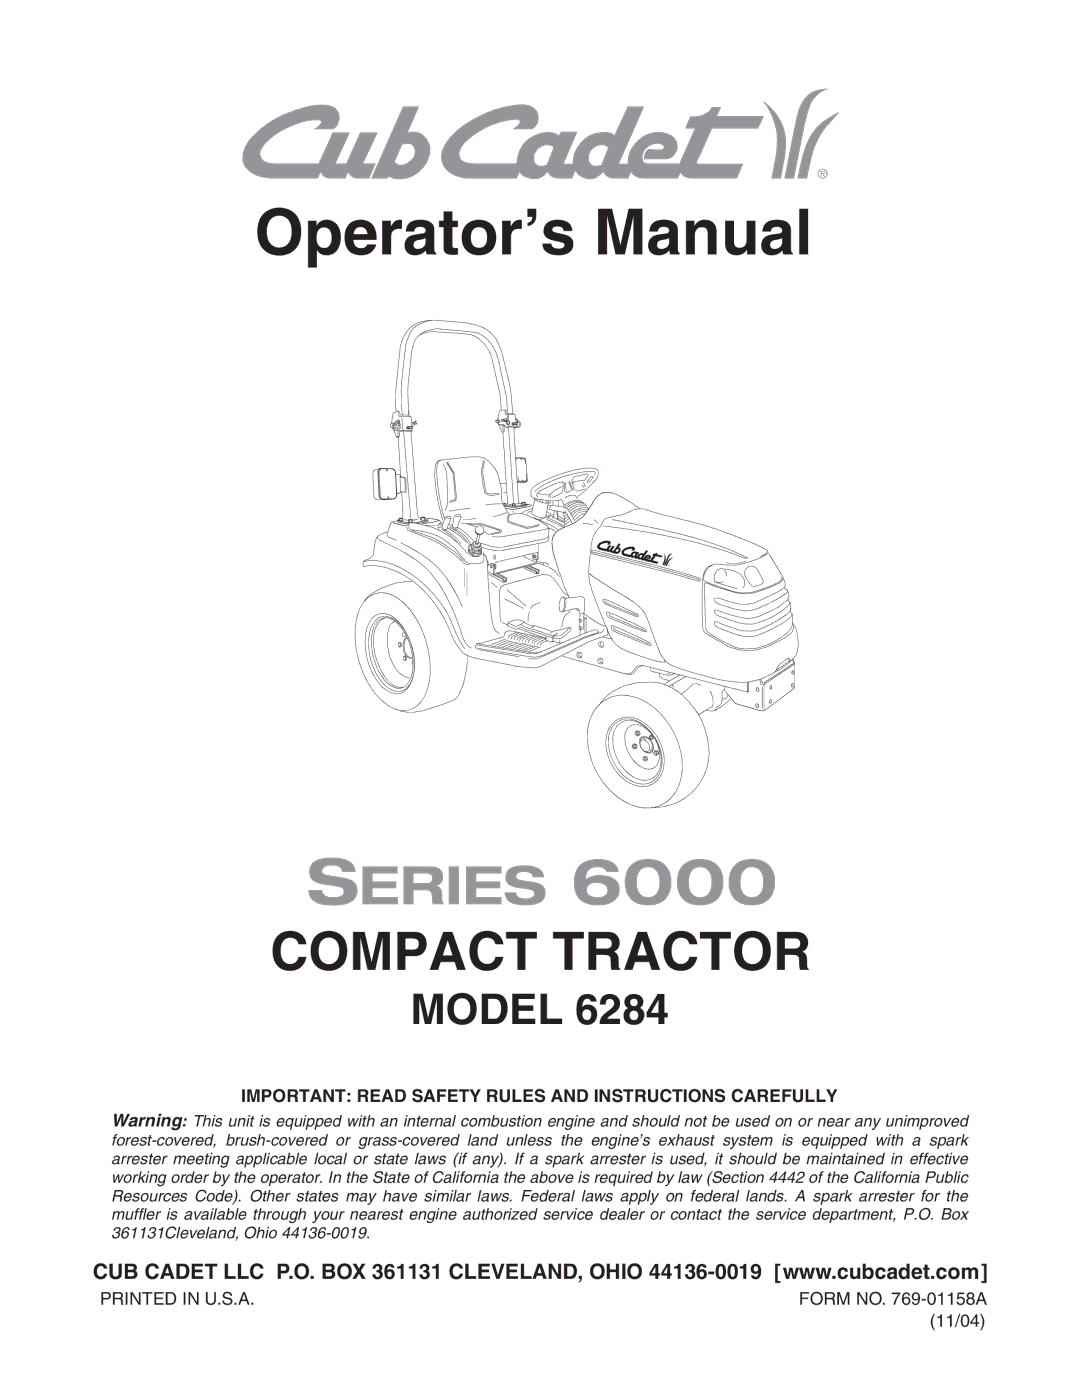 Cub Cadet 6284 manual Operator’s Manual, Important Read Safety Rules and Instructions Carefully 